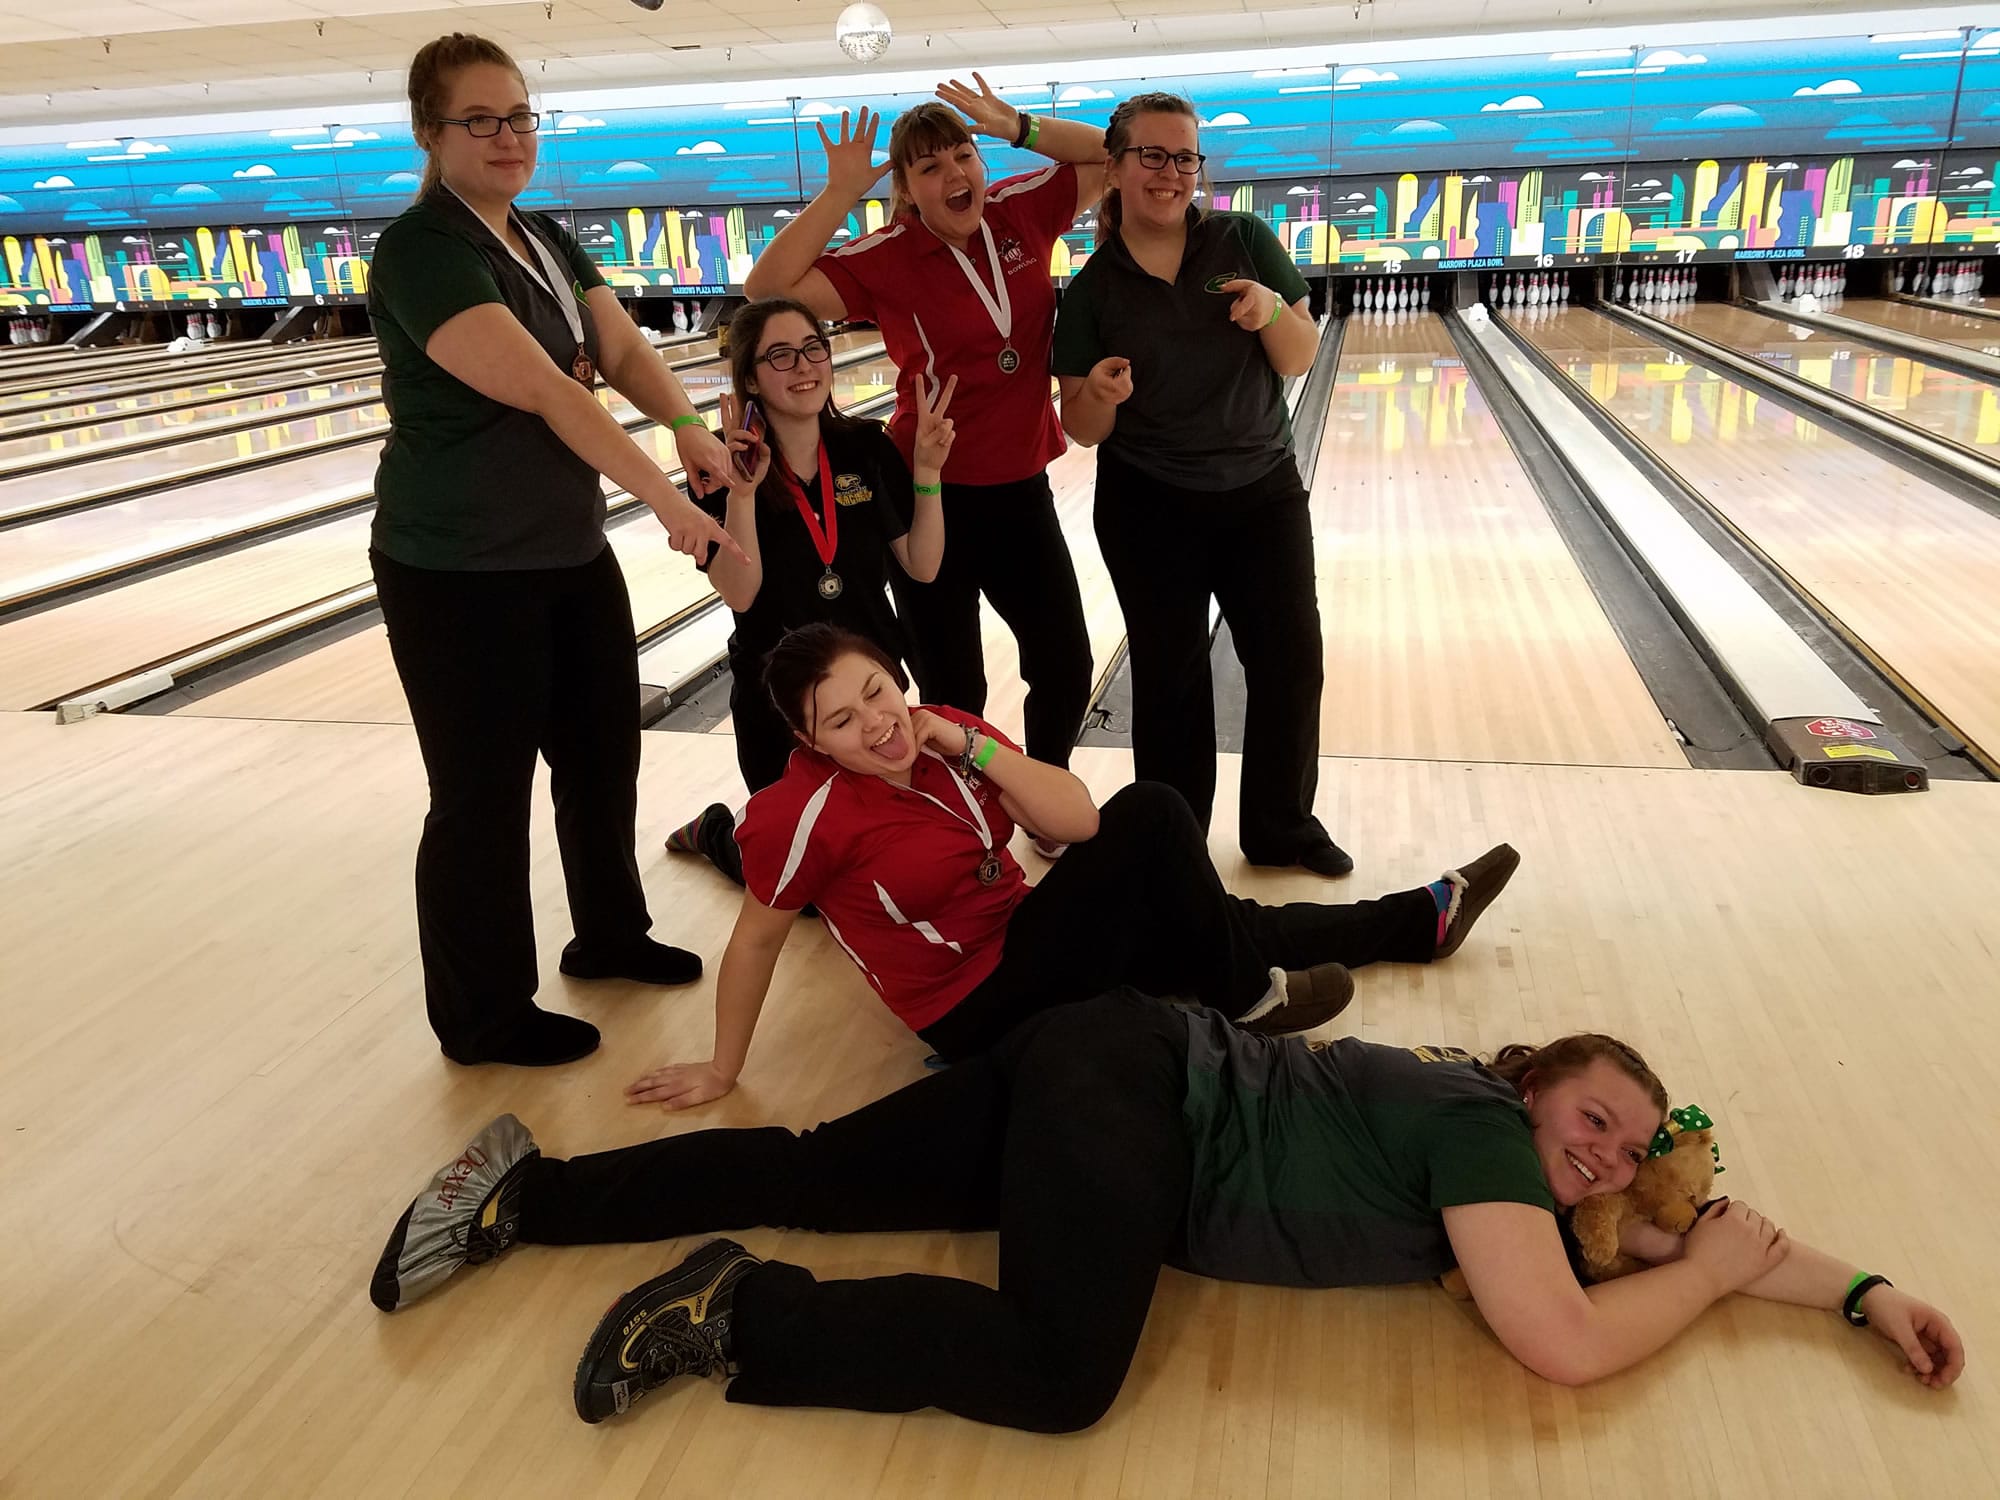 Bowlers from the Class 3A Greater St. Helens League — Evergreen’s Kerissa Andersen, Jessica Dufrain and Shannon Bliquez, Fort Vancouver’s Maddison Durr and Bailey Peters and Reagan Lorey of Hudson’s Bay — strike a pose after placing six bowlers in the top eight at the state tournament.